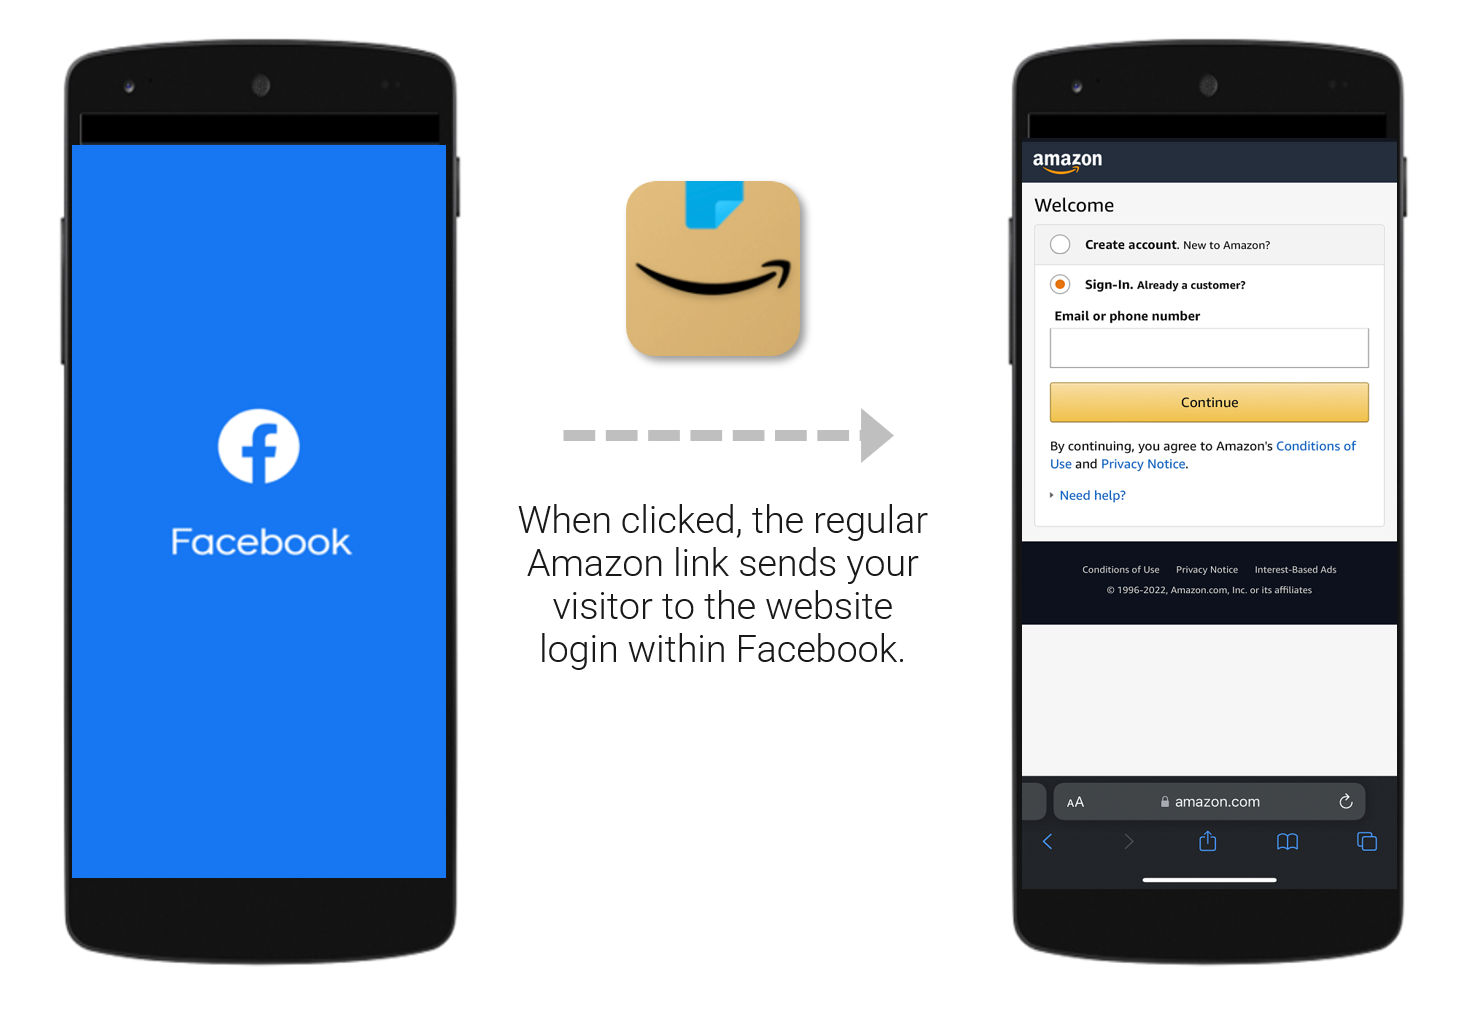 How to Make App Deep Links to Open the Amazon App from Facebook Advertising